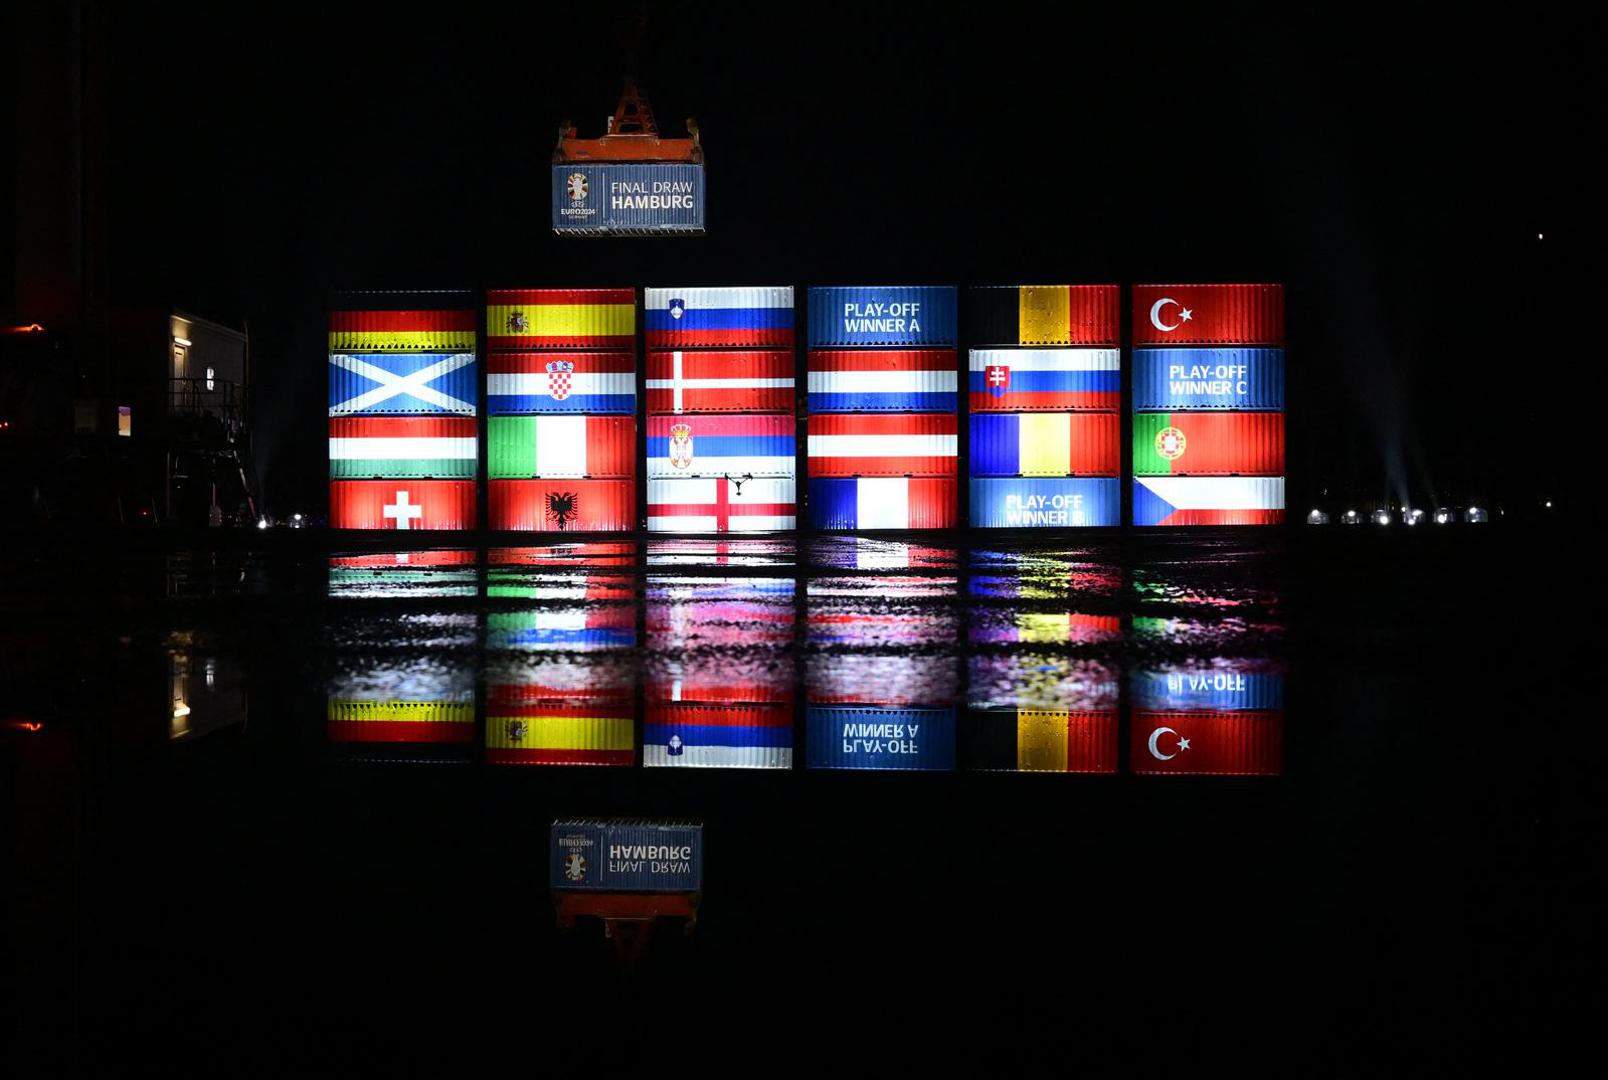 Soccer Football - Port workers in Hamburg stack containers with flags of the Euro 2024 teams in accordance with the Euro 2024 draw - Hamburg, Germany - December 2, 2023  General view of the final groups displayed on containers in Hamburg Port REUTERS/Fabian Bimmer Photo: Fabian Bimmer/REUTERS